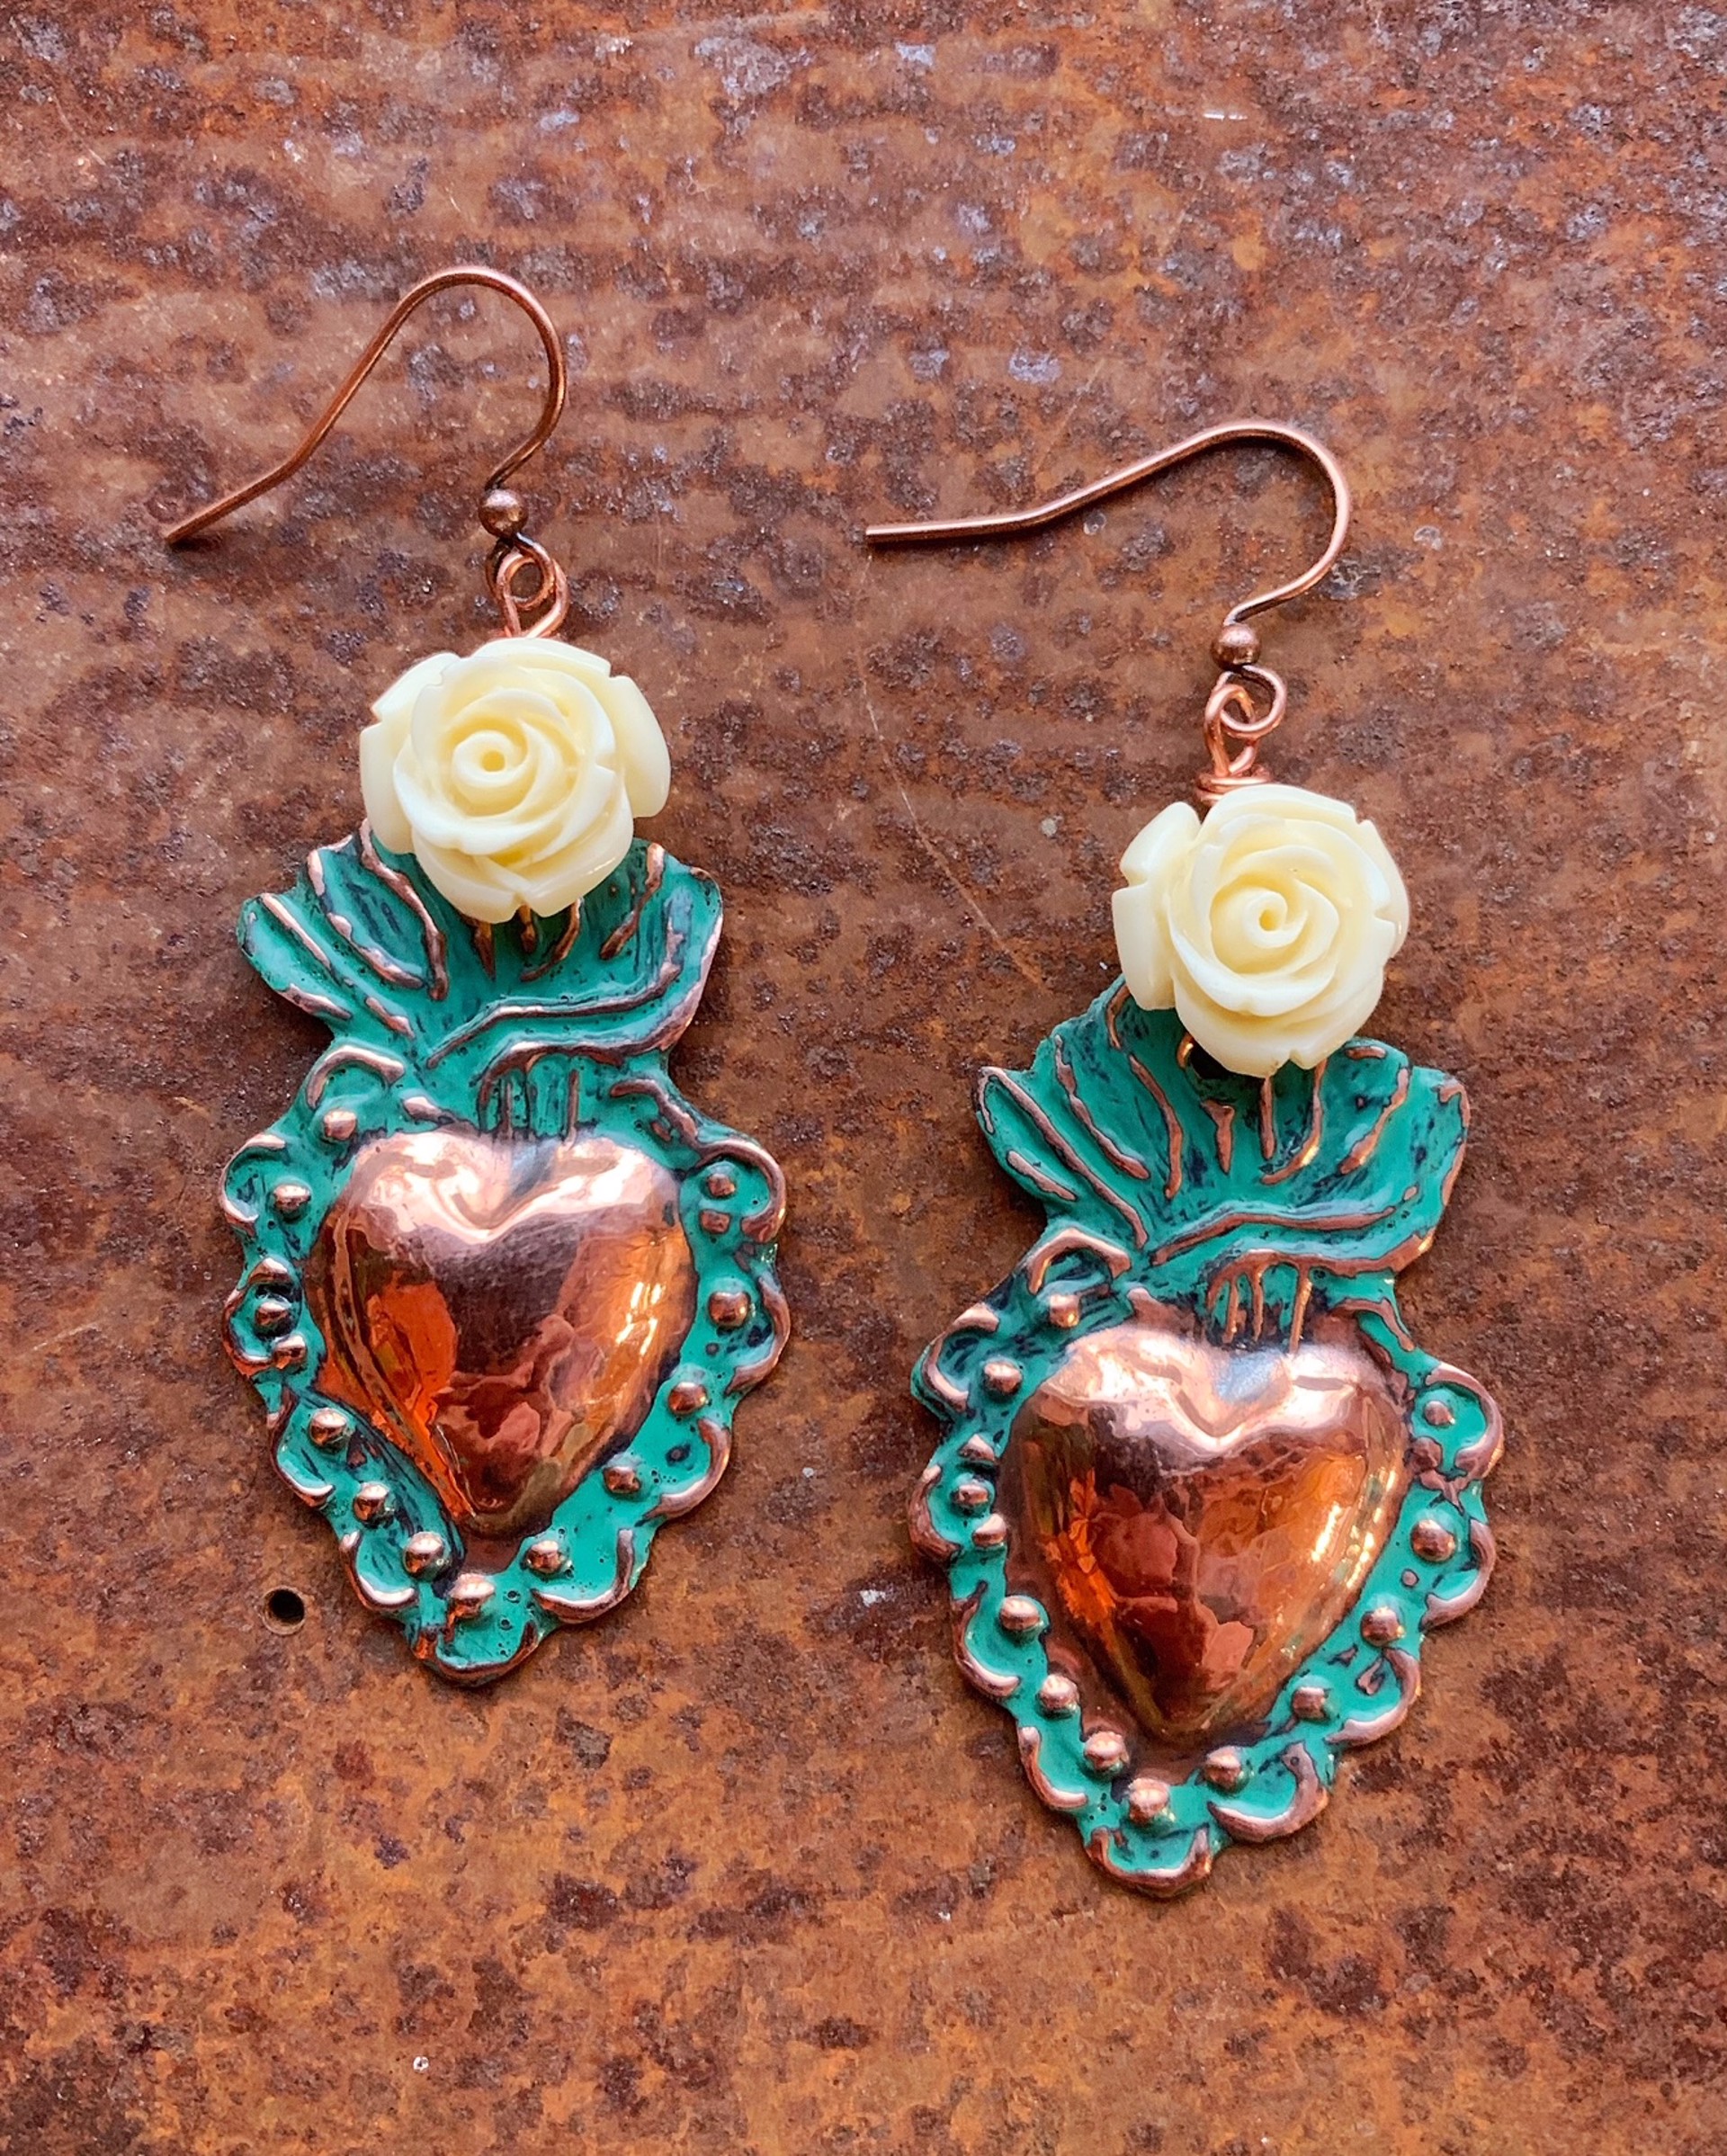 K795 Sacred Heart Earrings with White Roses by Kelly Ormsby